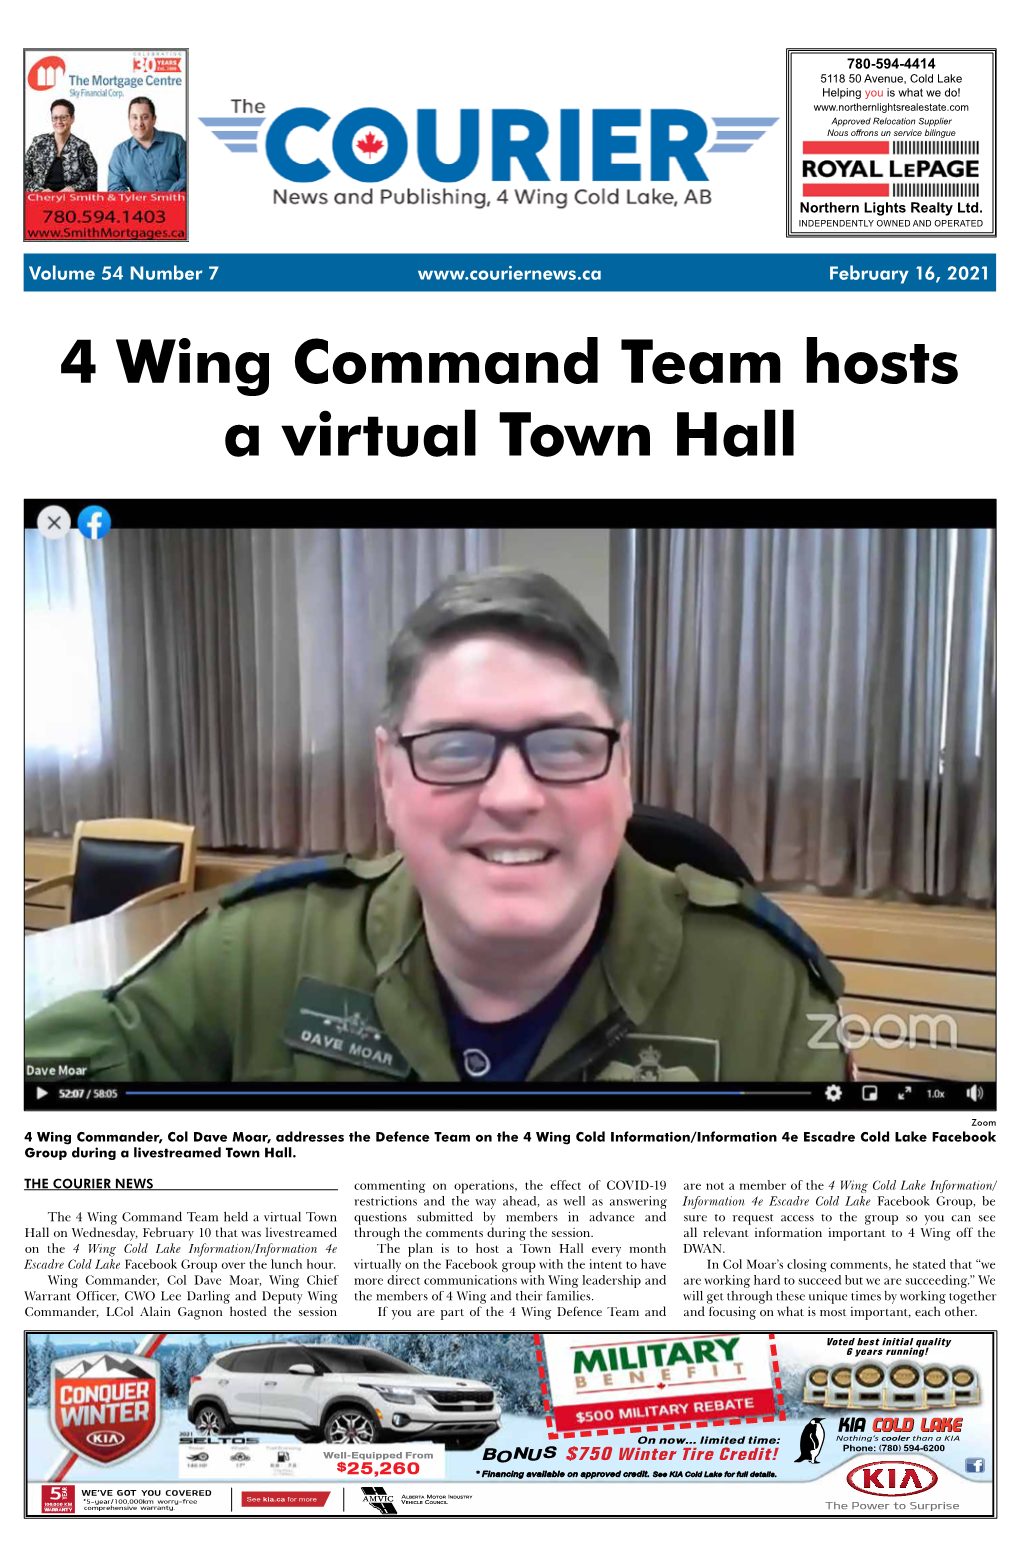 4 Wing Command Team Hosts a Virtual Town Hall